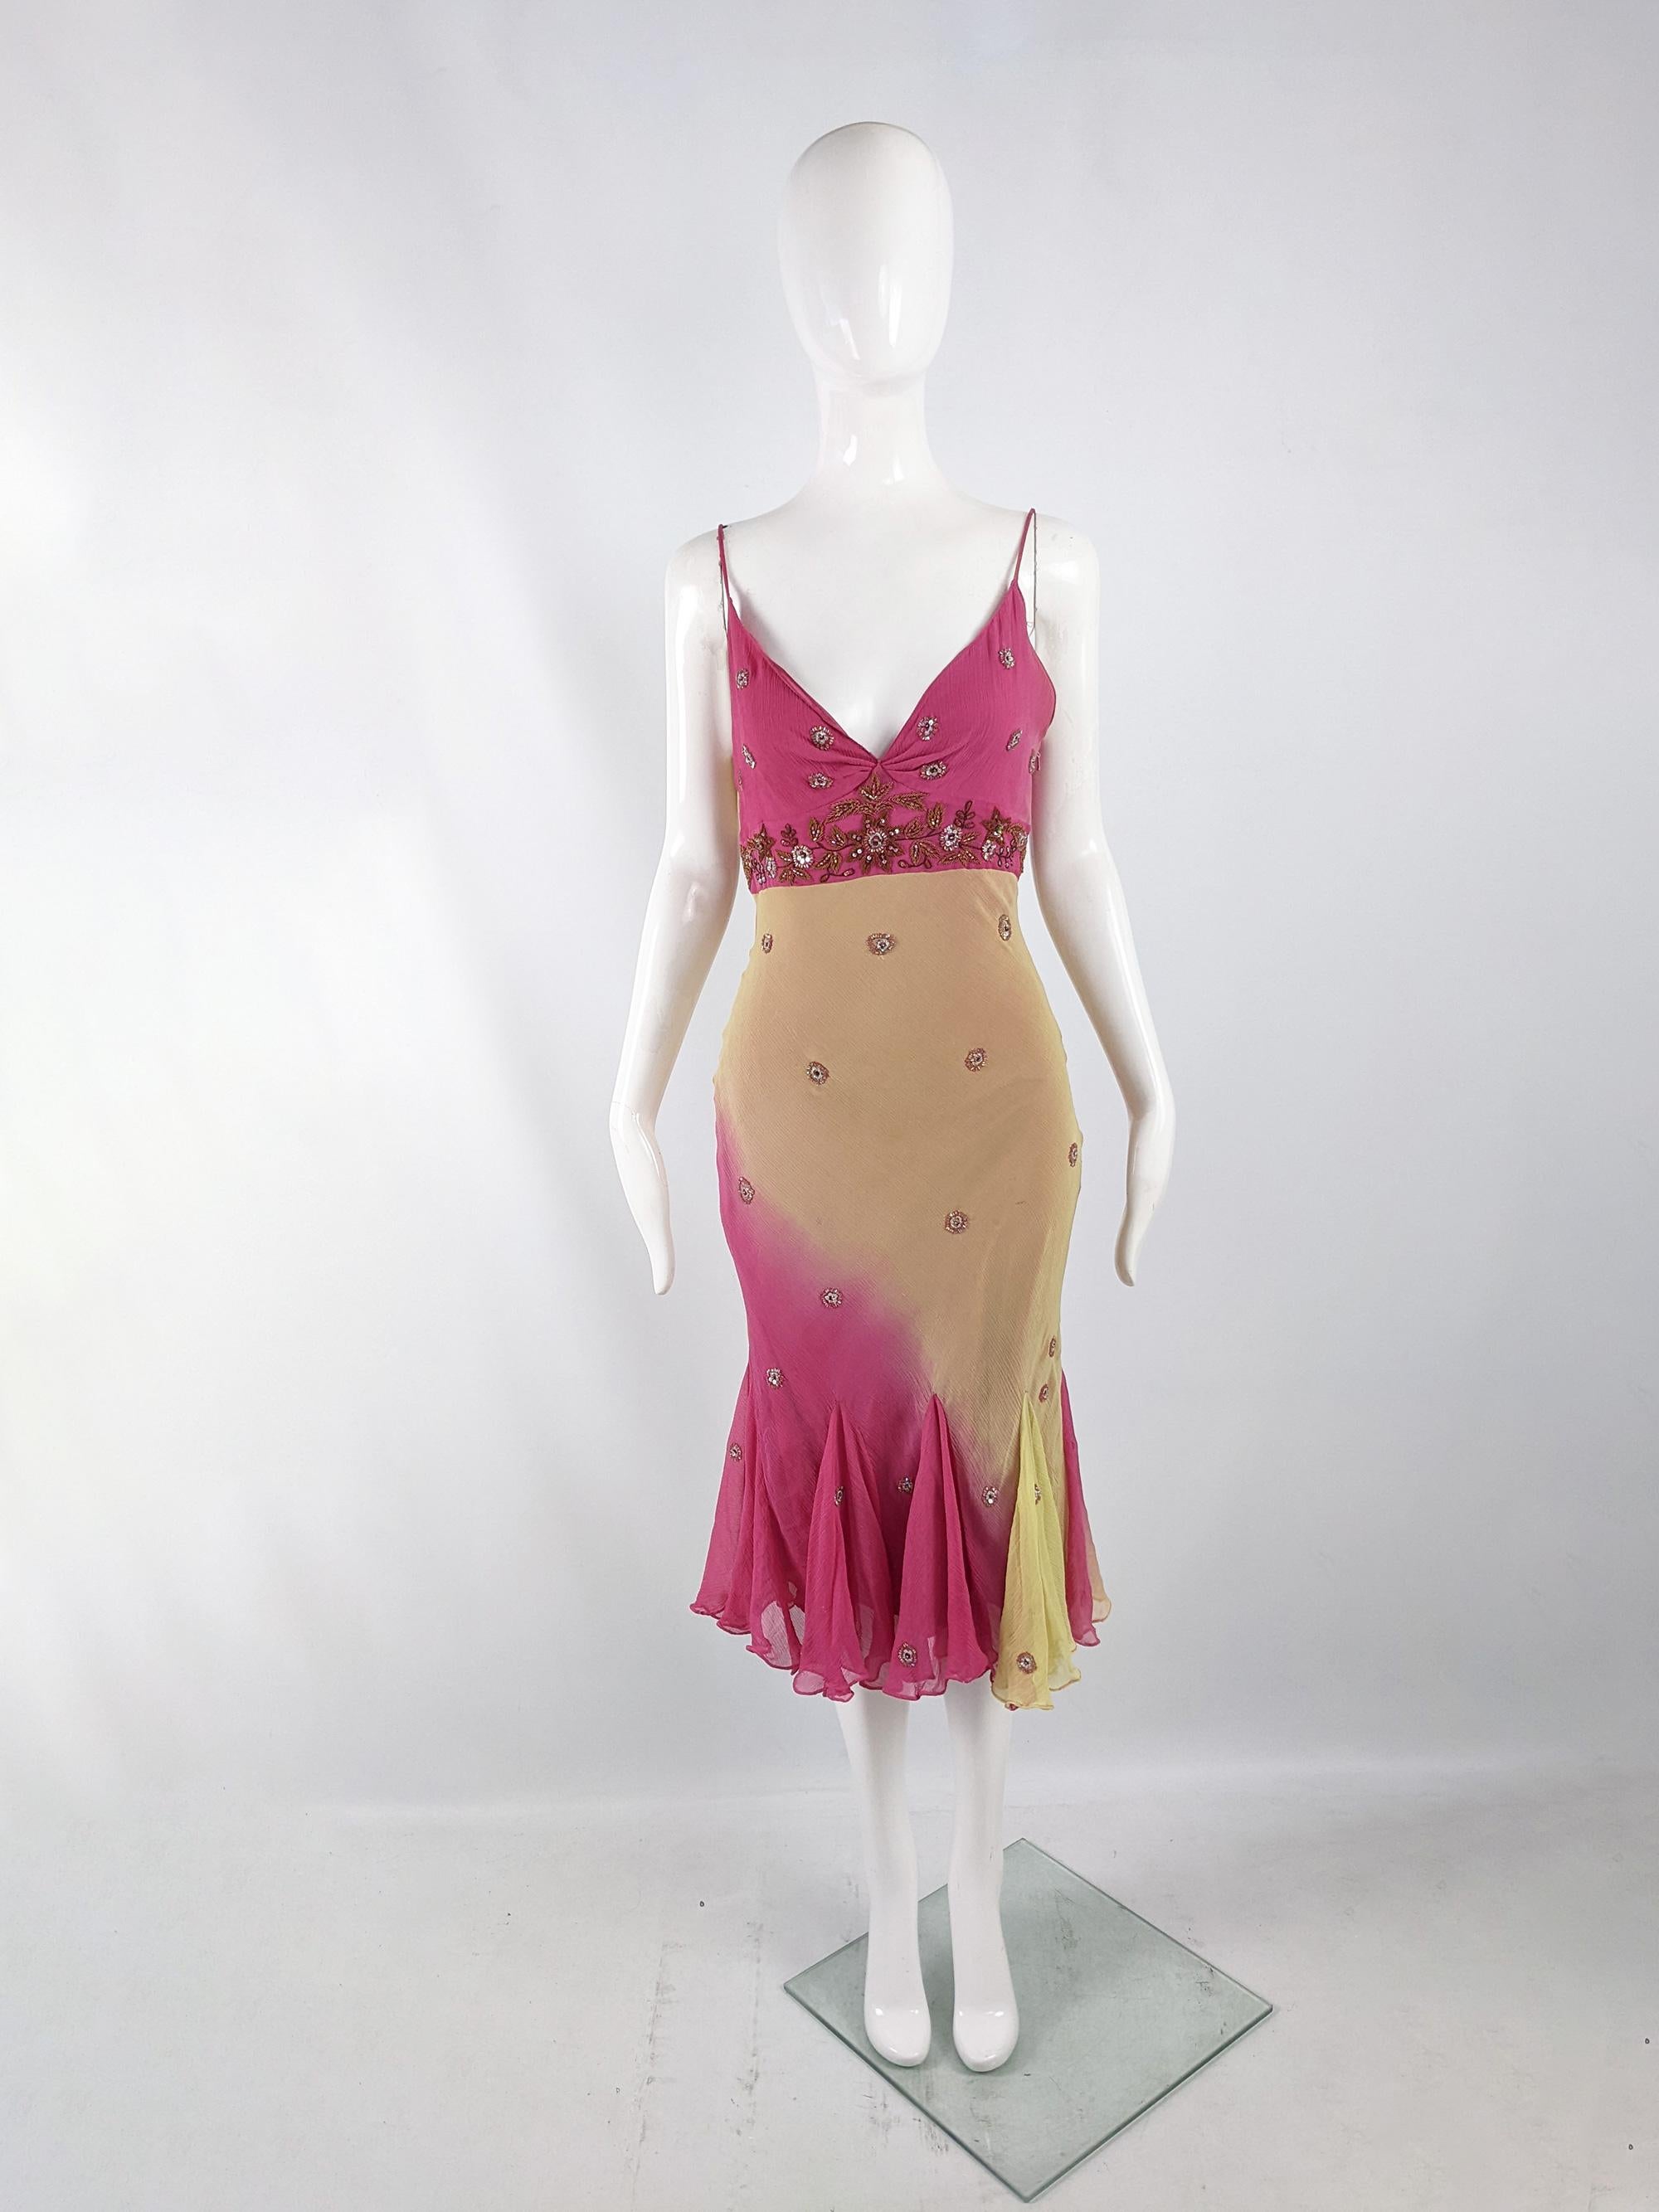 An incredible vintage womens party dress from the late 90s / early 2000s. In a bias cut fuchsia and palest pastel lime coloured pure silk chiffon. It has glamorous, intricate beading throughout.

Size: Unlabelled; measures roughly like a modern